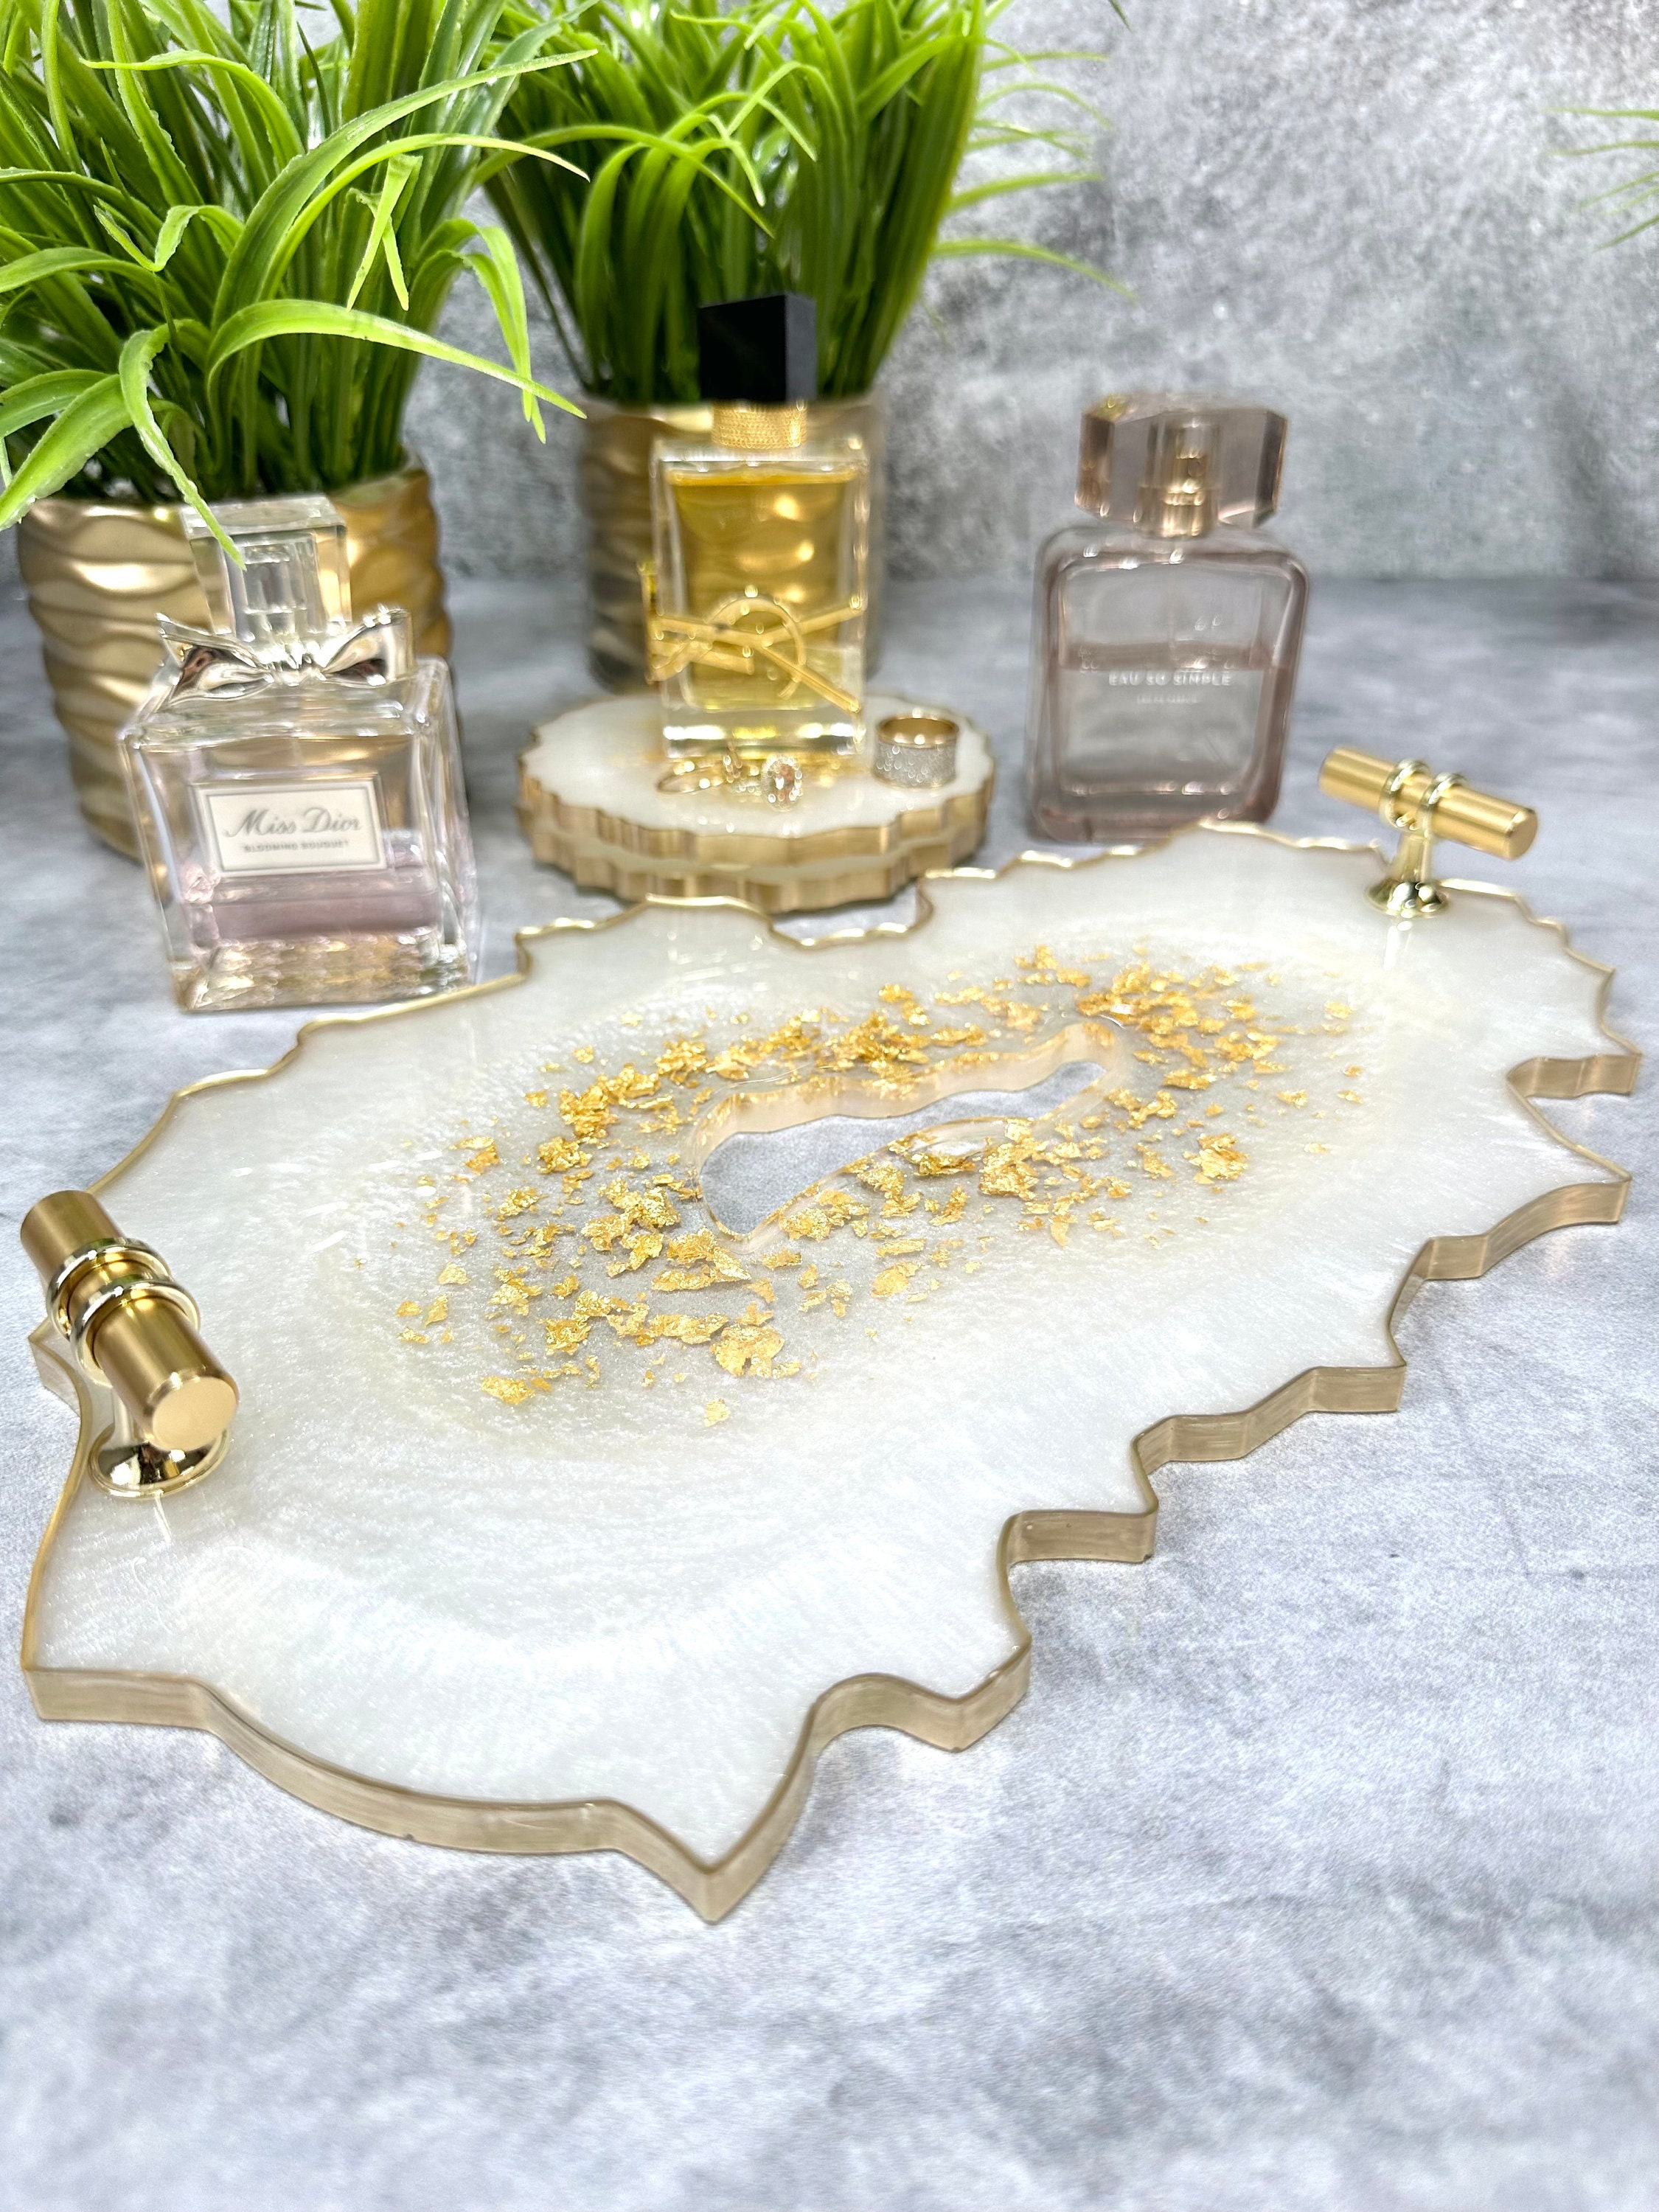 Delicate Gold, Gray and White Resin Marble Effect Tray With